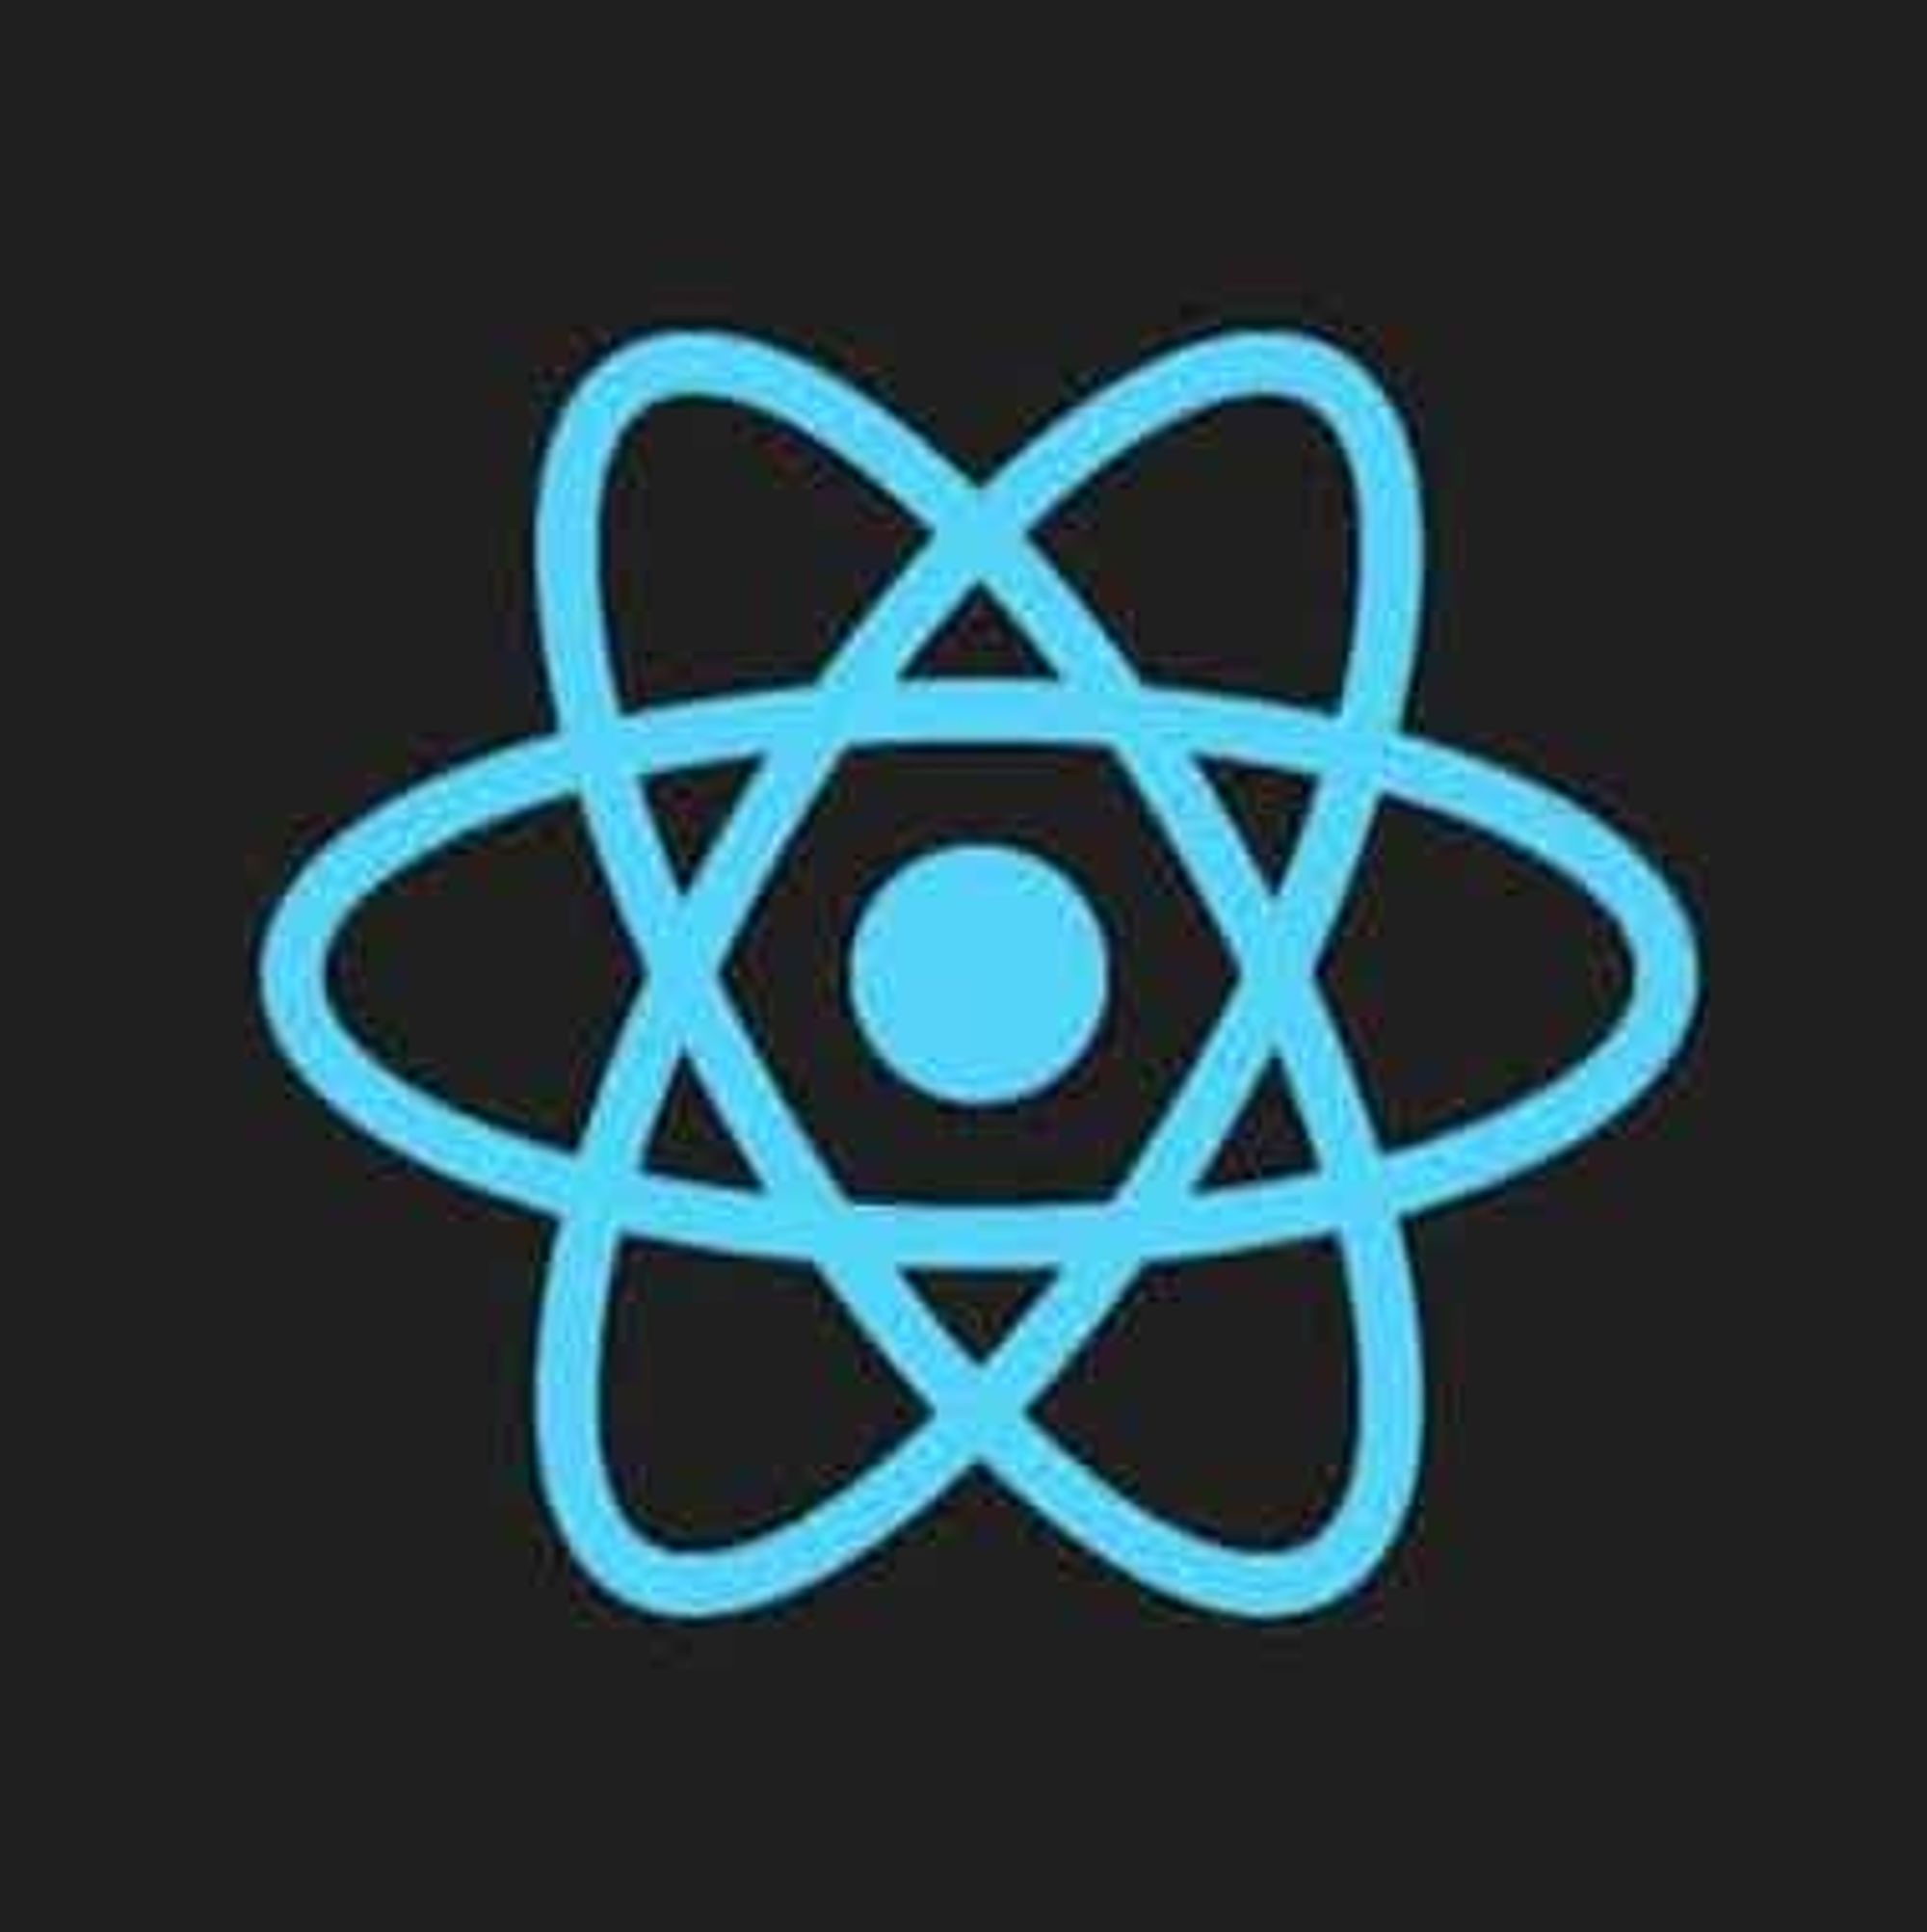 React component